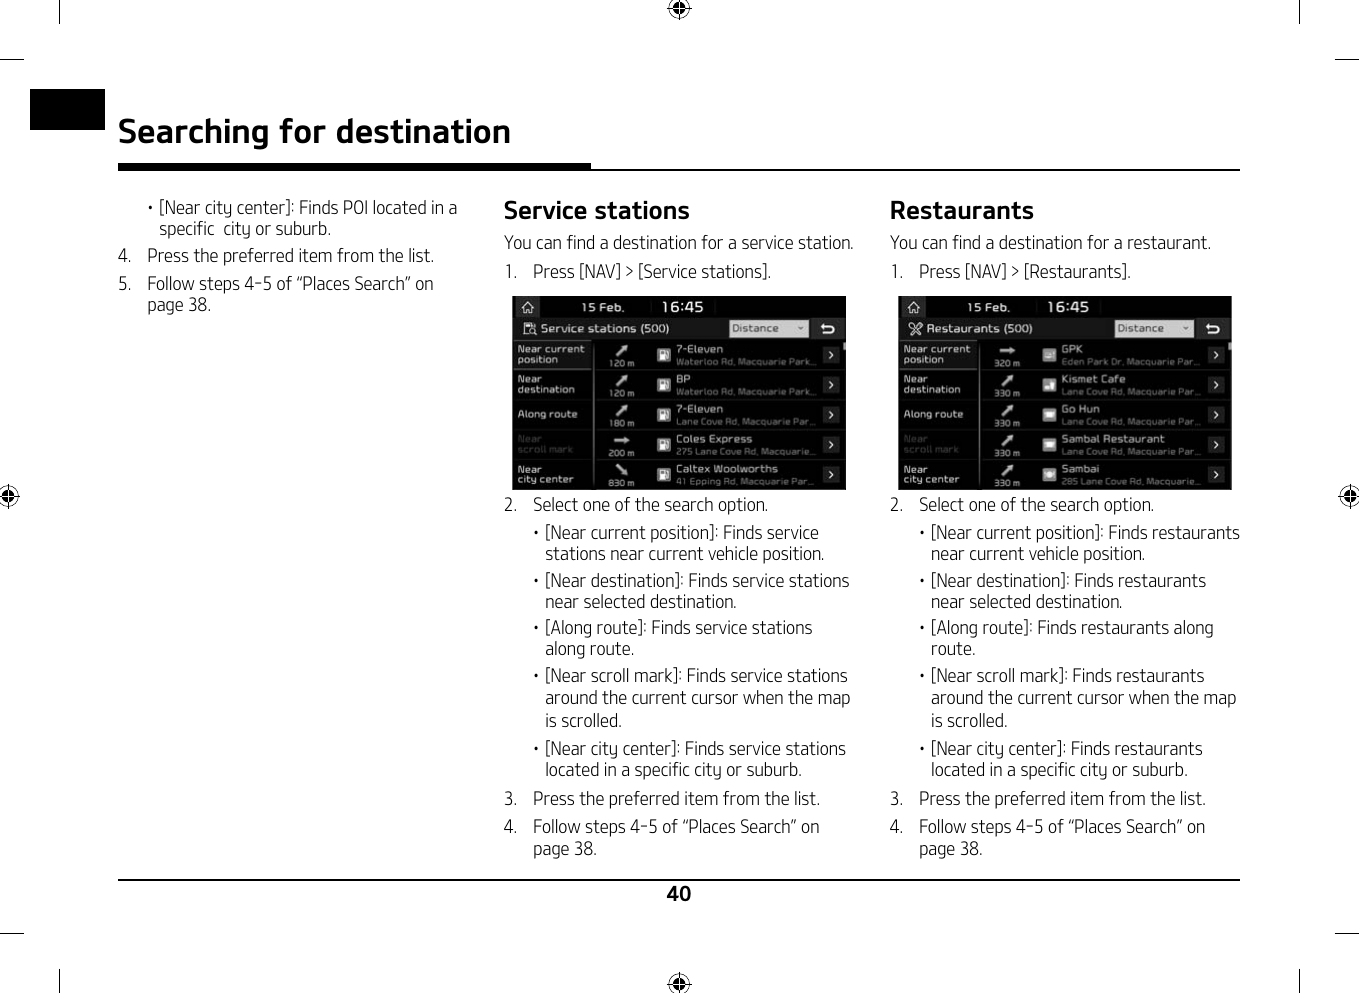 40Searching for destination䳜 [Near city center]: Finds POI located in a specific  city or suburb.4.   Press the preferred item from the list.5.  Follow steps 4-5 of 䳖Places Search䳗 on page 38.Service stationsYou can find a destination for a service station.1.   Press [NAV] &gt; [Service stations].2.   Select one of the search option.䳜 [Near current position]: Finds service stations near current vehicle position. 䳜 [Near destination]: Finds service stations near selected destination. 䳜 [Along route]: Finds service stations along route.䳜 [Near scroll mark]: Finds service stations around the current cursor when the map is scrolled.䳜 [Near city center]: Finds service stations located in a specific city or suburb.3.   Press the preferred item from the list.4.  Follow steps 4-5 of 䳖Places Search䳗 on page 38.RestaurantsYou can find a destination for a restaurant.1.   Press [NAV] &gt; [Restaurants].2.   Select one of the search option.䳜 [Near current position]: Finds restaurants near current vehicle position. 䳜 [Near destination]: Finds restaurants  near selected destination. 䳜 [Along route]: Finds restaurants along route.䳜 [Near scroll mark]: Finds restaurants around the current cursor when the map is scrolled.䳜 [Near city center]: Finds restaurants located in a specific city or suburb.3.   Press the preferred item from the list.4.  Follow steps 4-5 of 䳖Places Search䳗 on page 38.